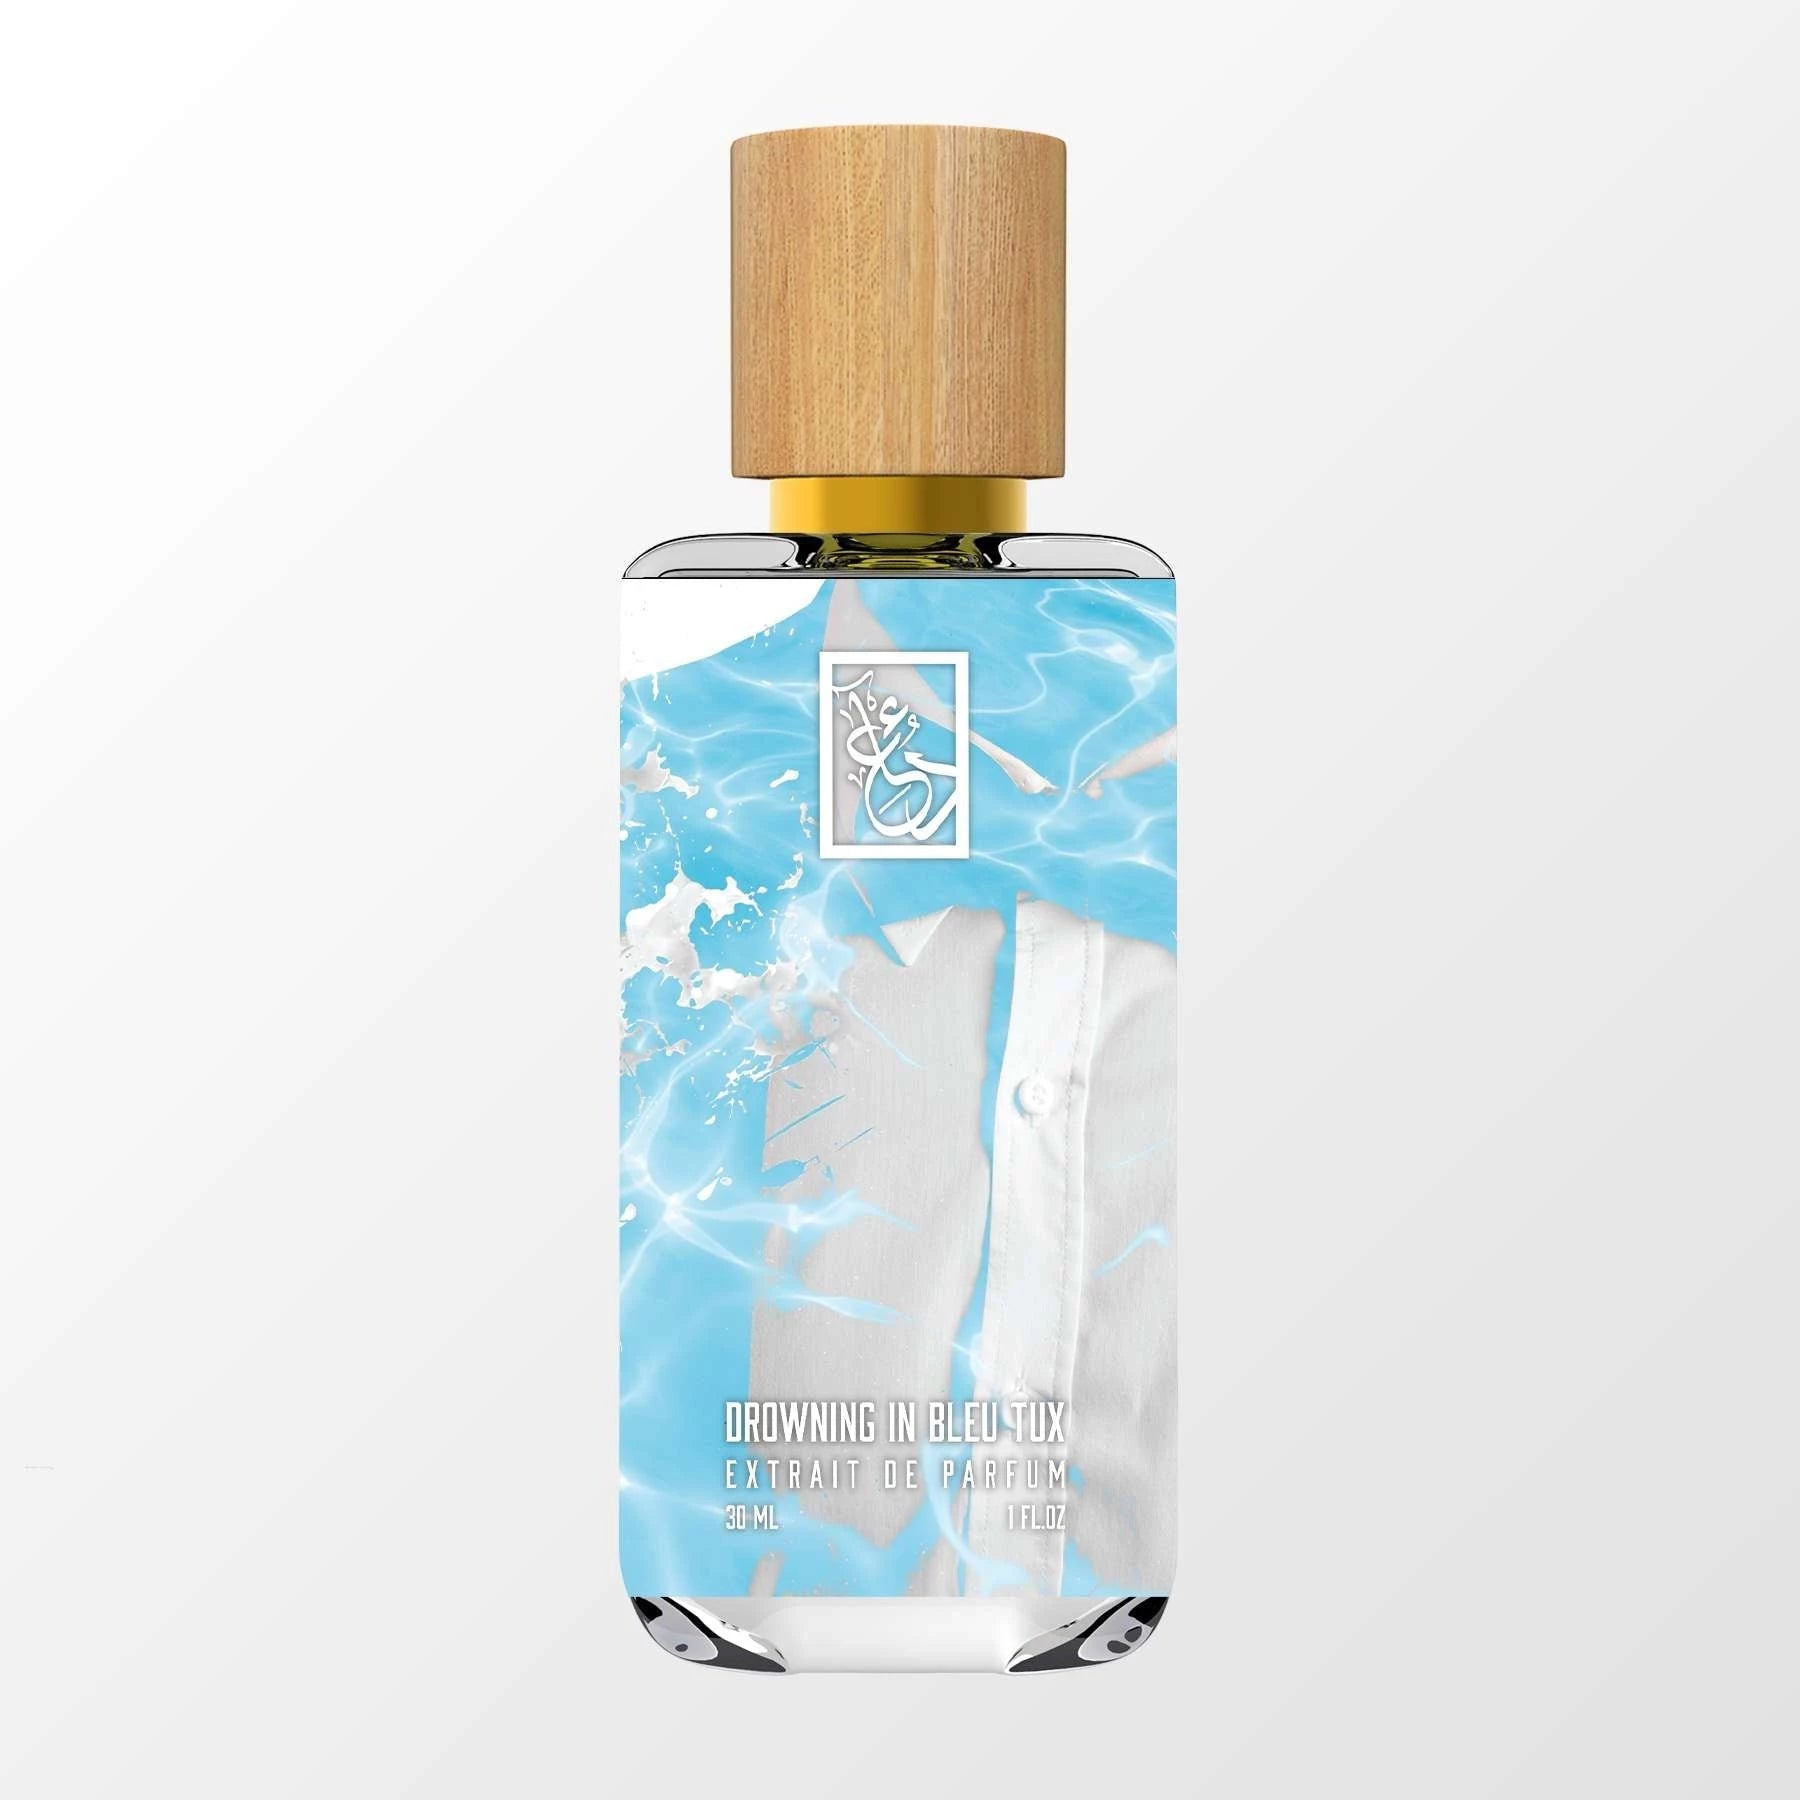 No. 04 Violet & White Lily by Rituals » Reviews & Perfume Facts